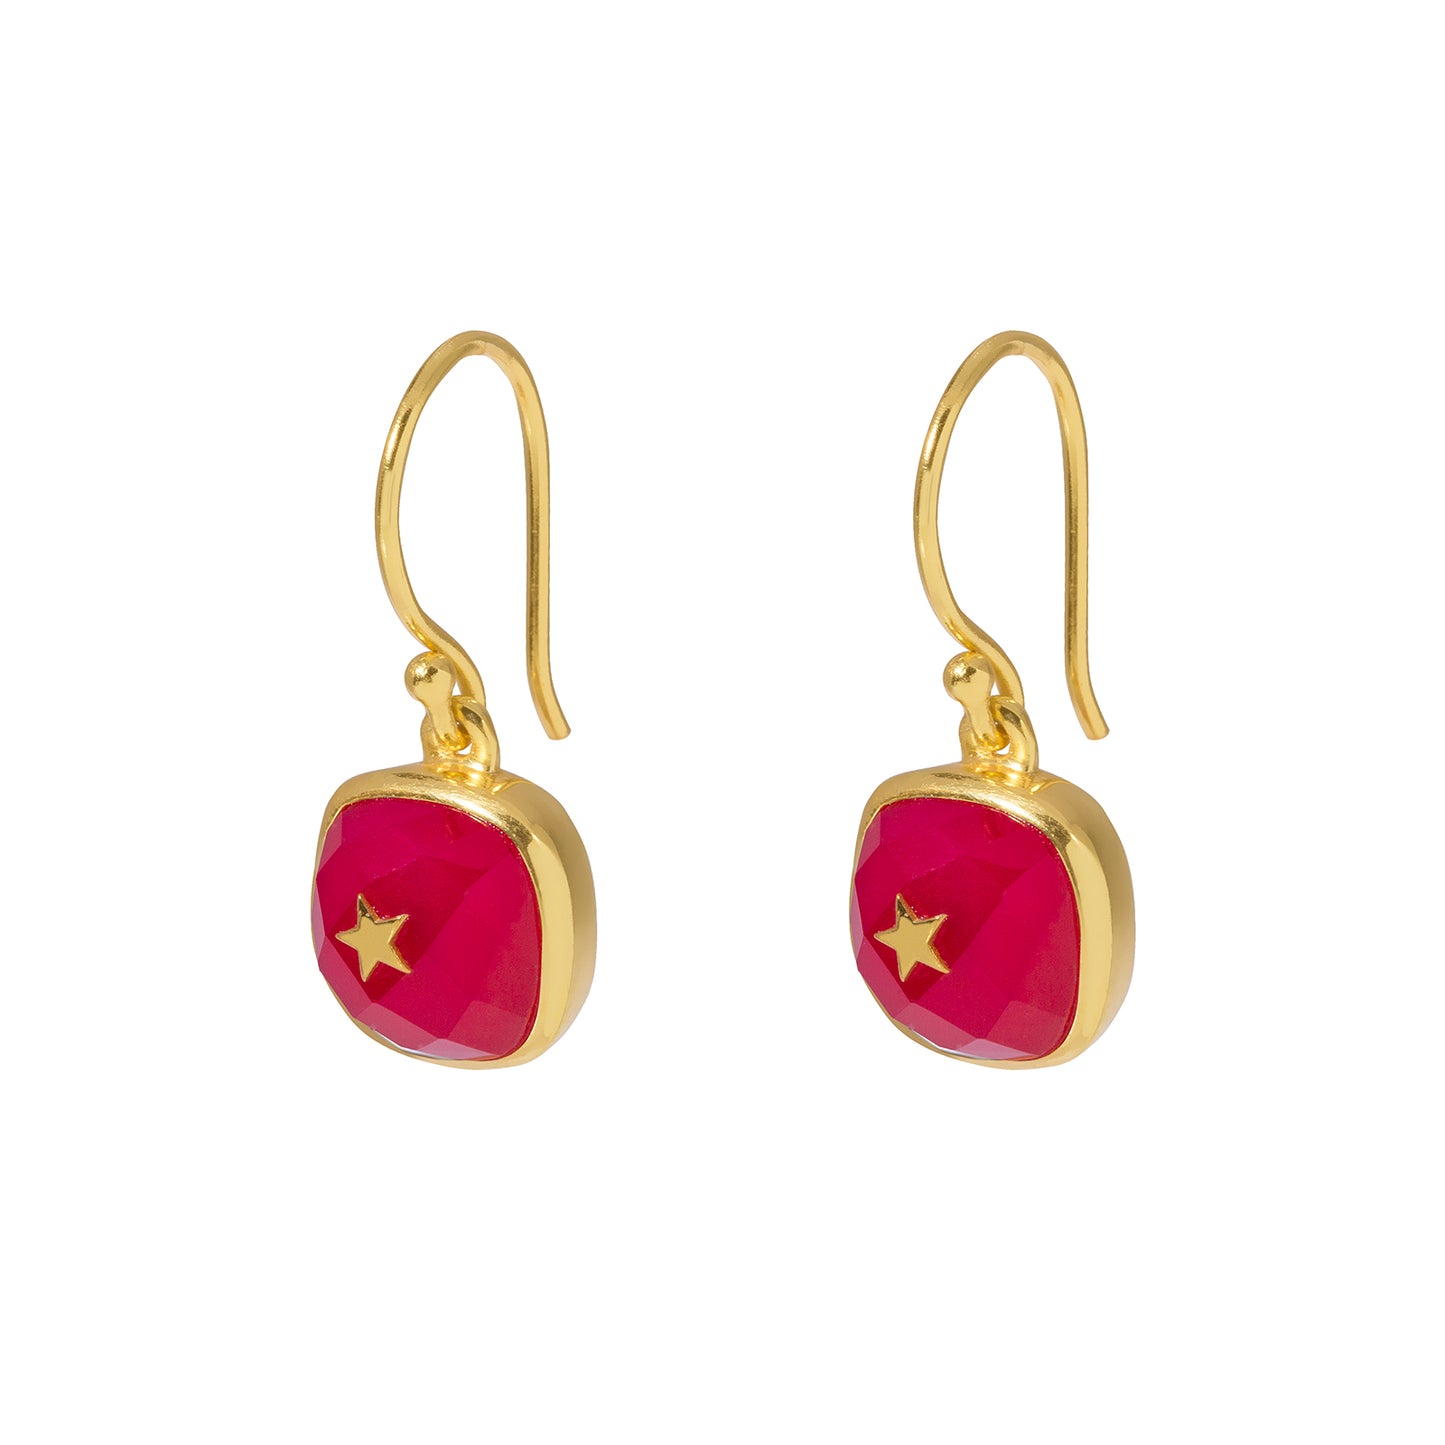 Pink Fuchsia Earrings Representing Confidence, Power and Self Worth